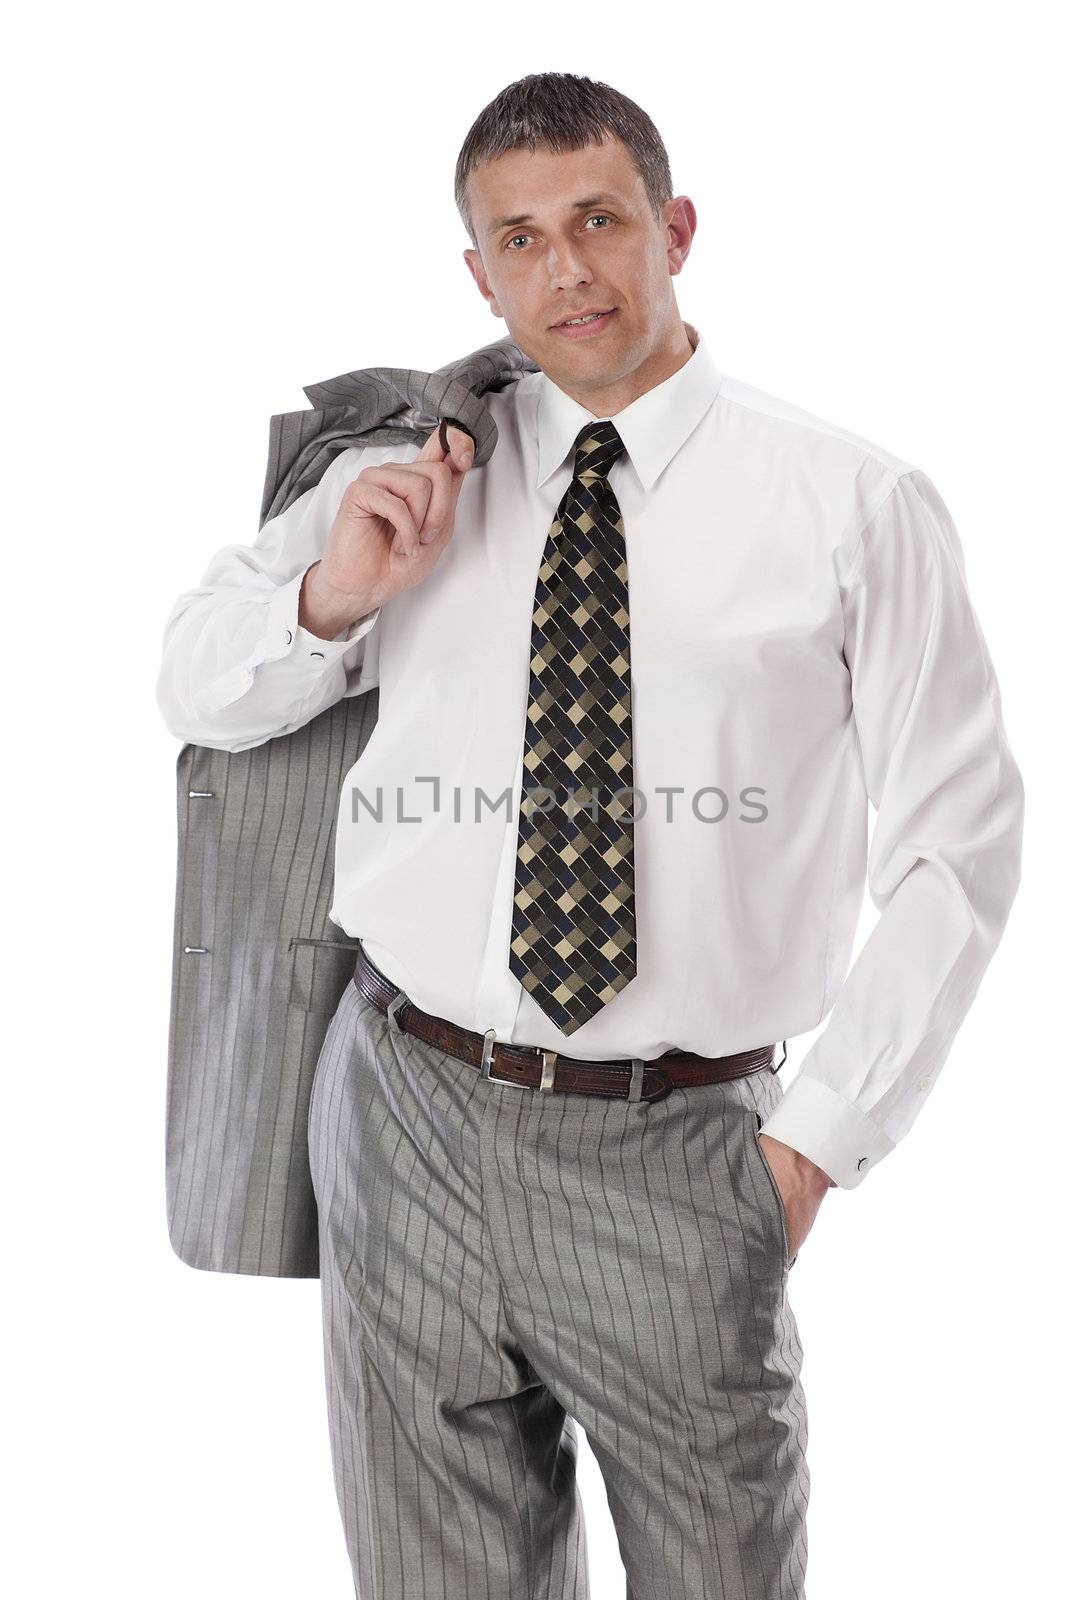 Faultless classical business style in clothes - is success modern men